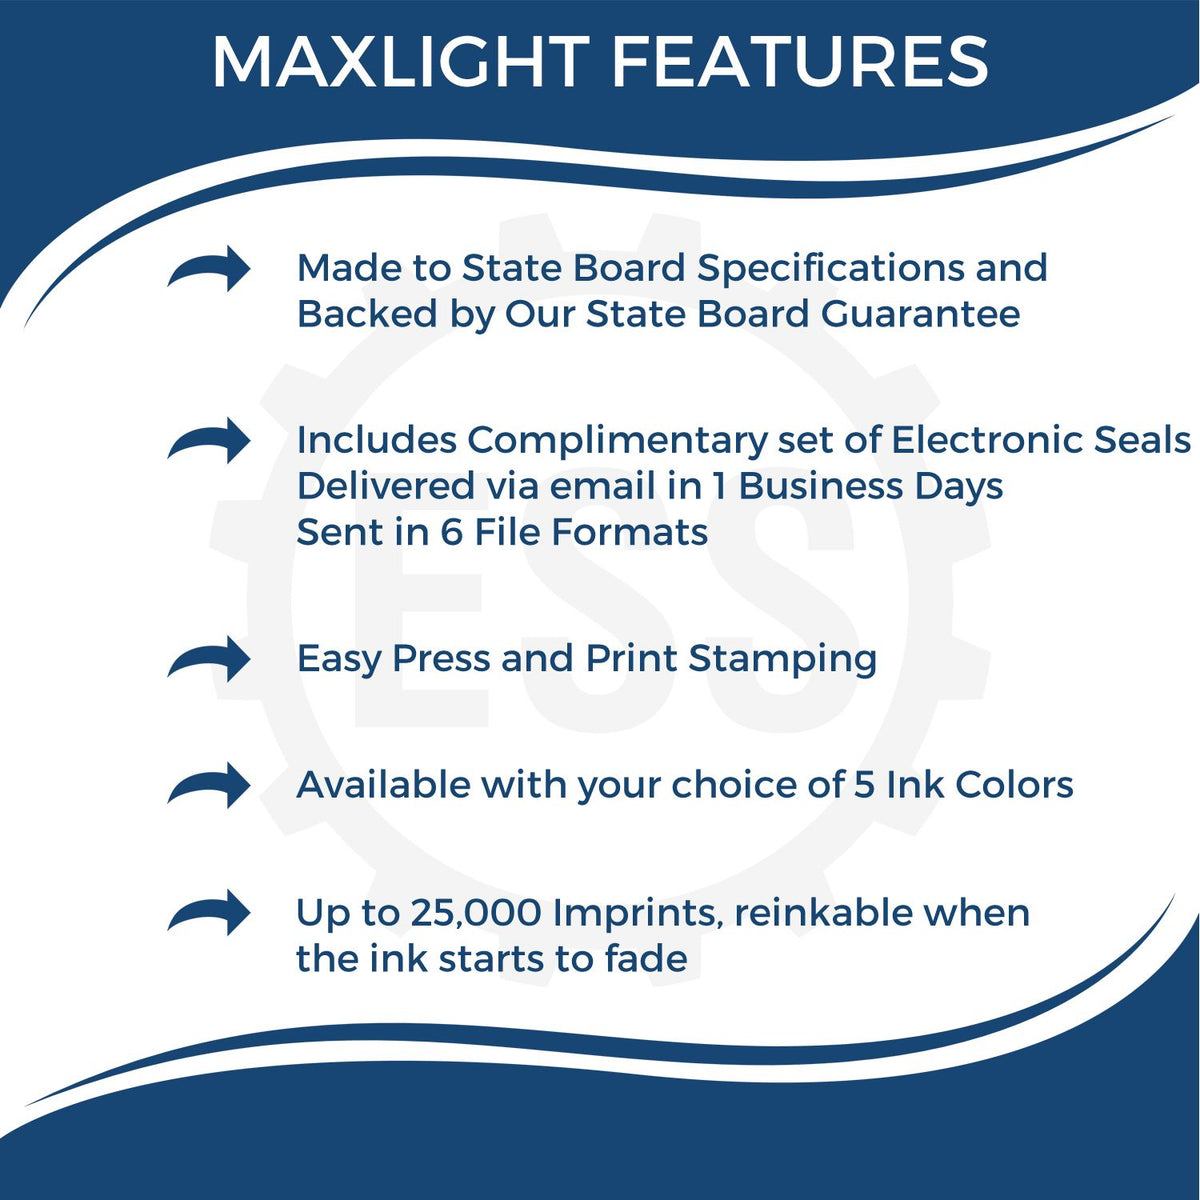 A picture of an infographic highlighting the selling points for the Premium MaxLight Pre-Inked Tennessee Geology Stamp